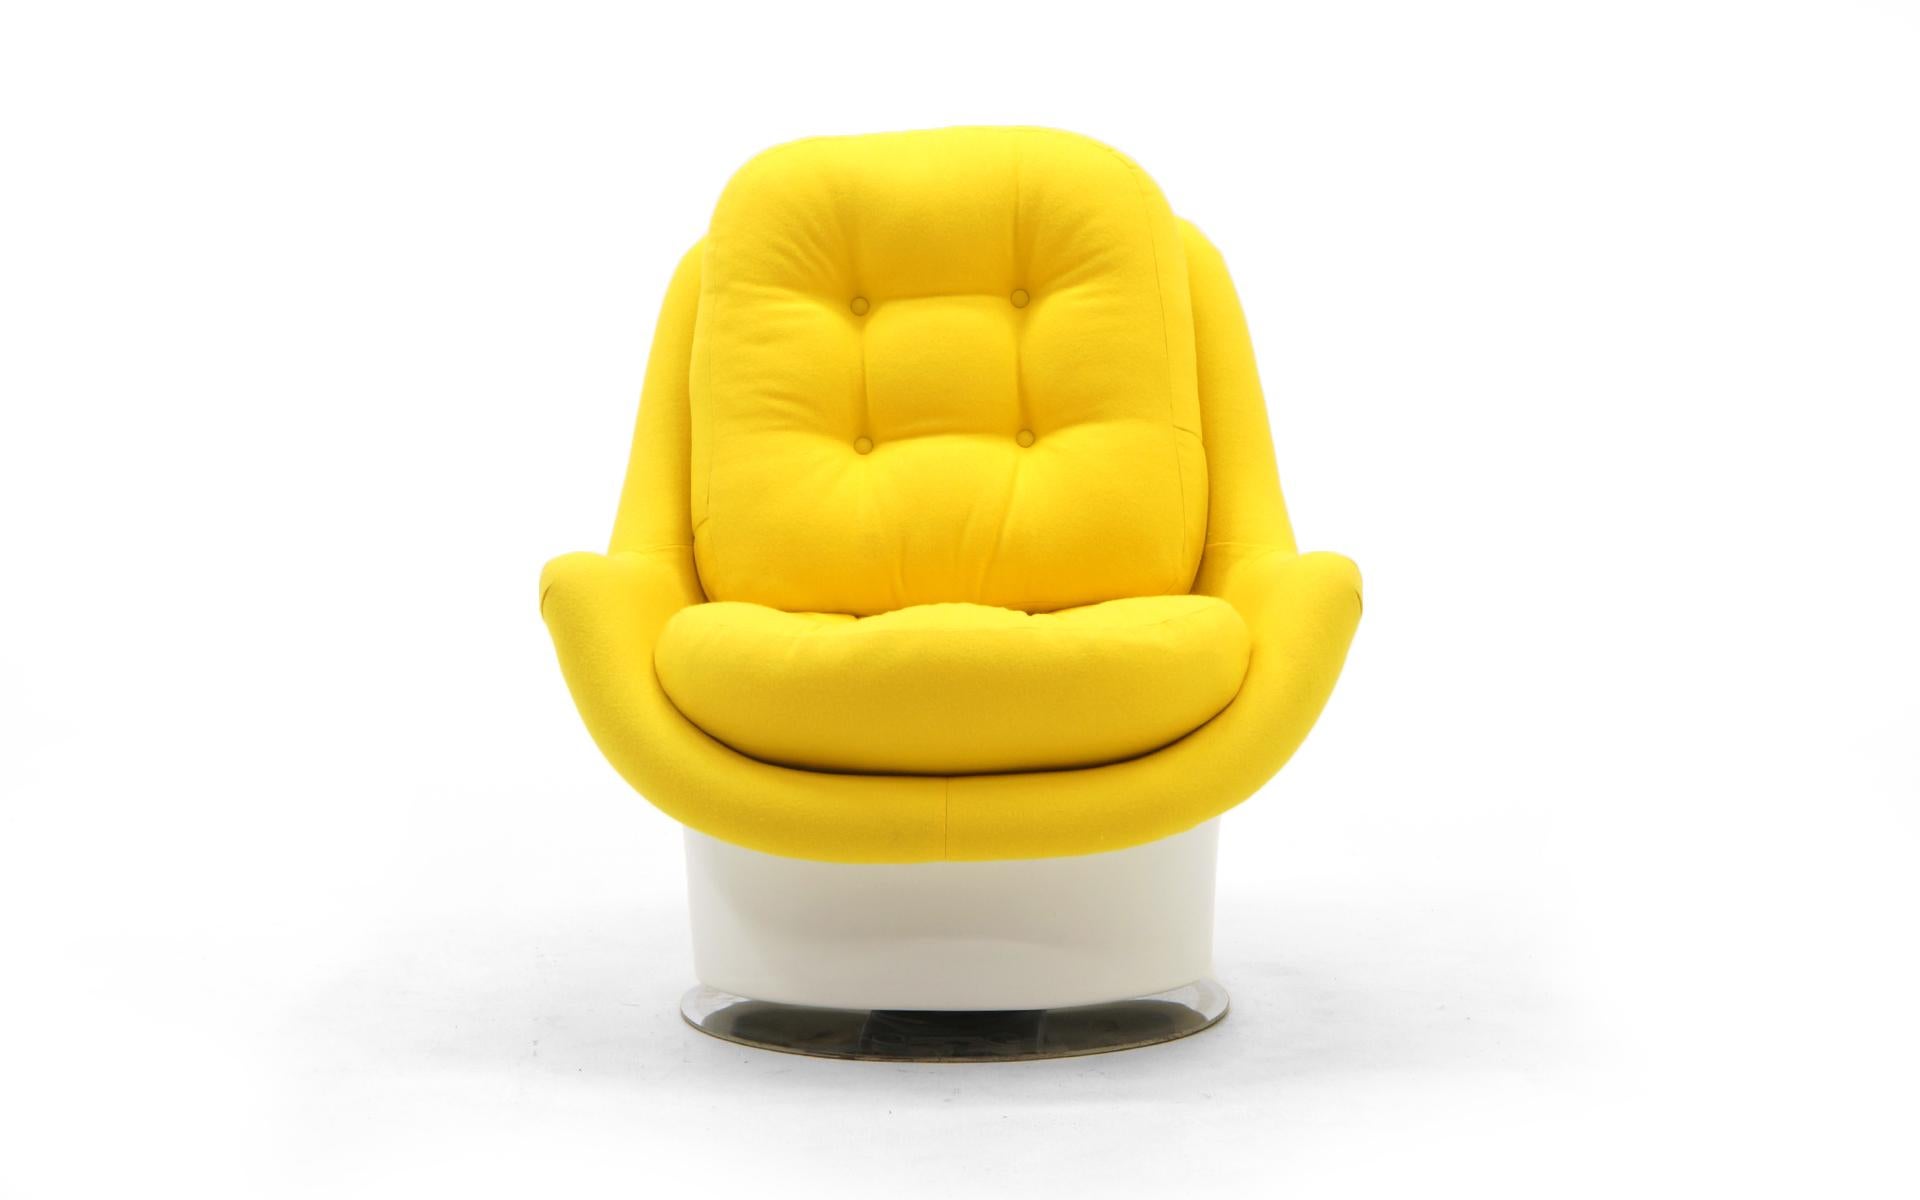 Milo Baughman for Thayer Coggin mod high back tilt swivel lounge chair. Completely and expertly restored. The fiberglass shell is bright white and the new upholstery (new foam and batting as well) i.s bright yellow Knoll. Super comfortable, larger